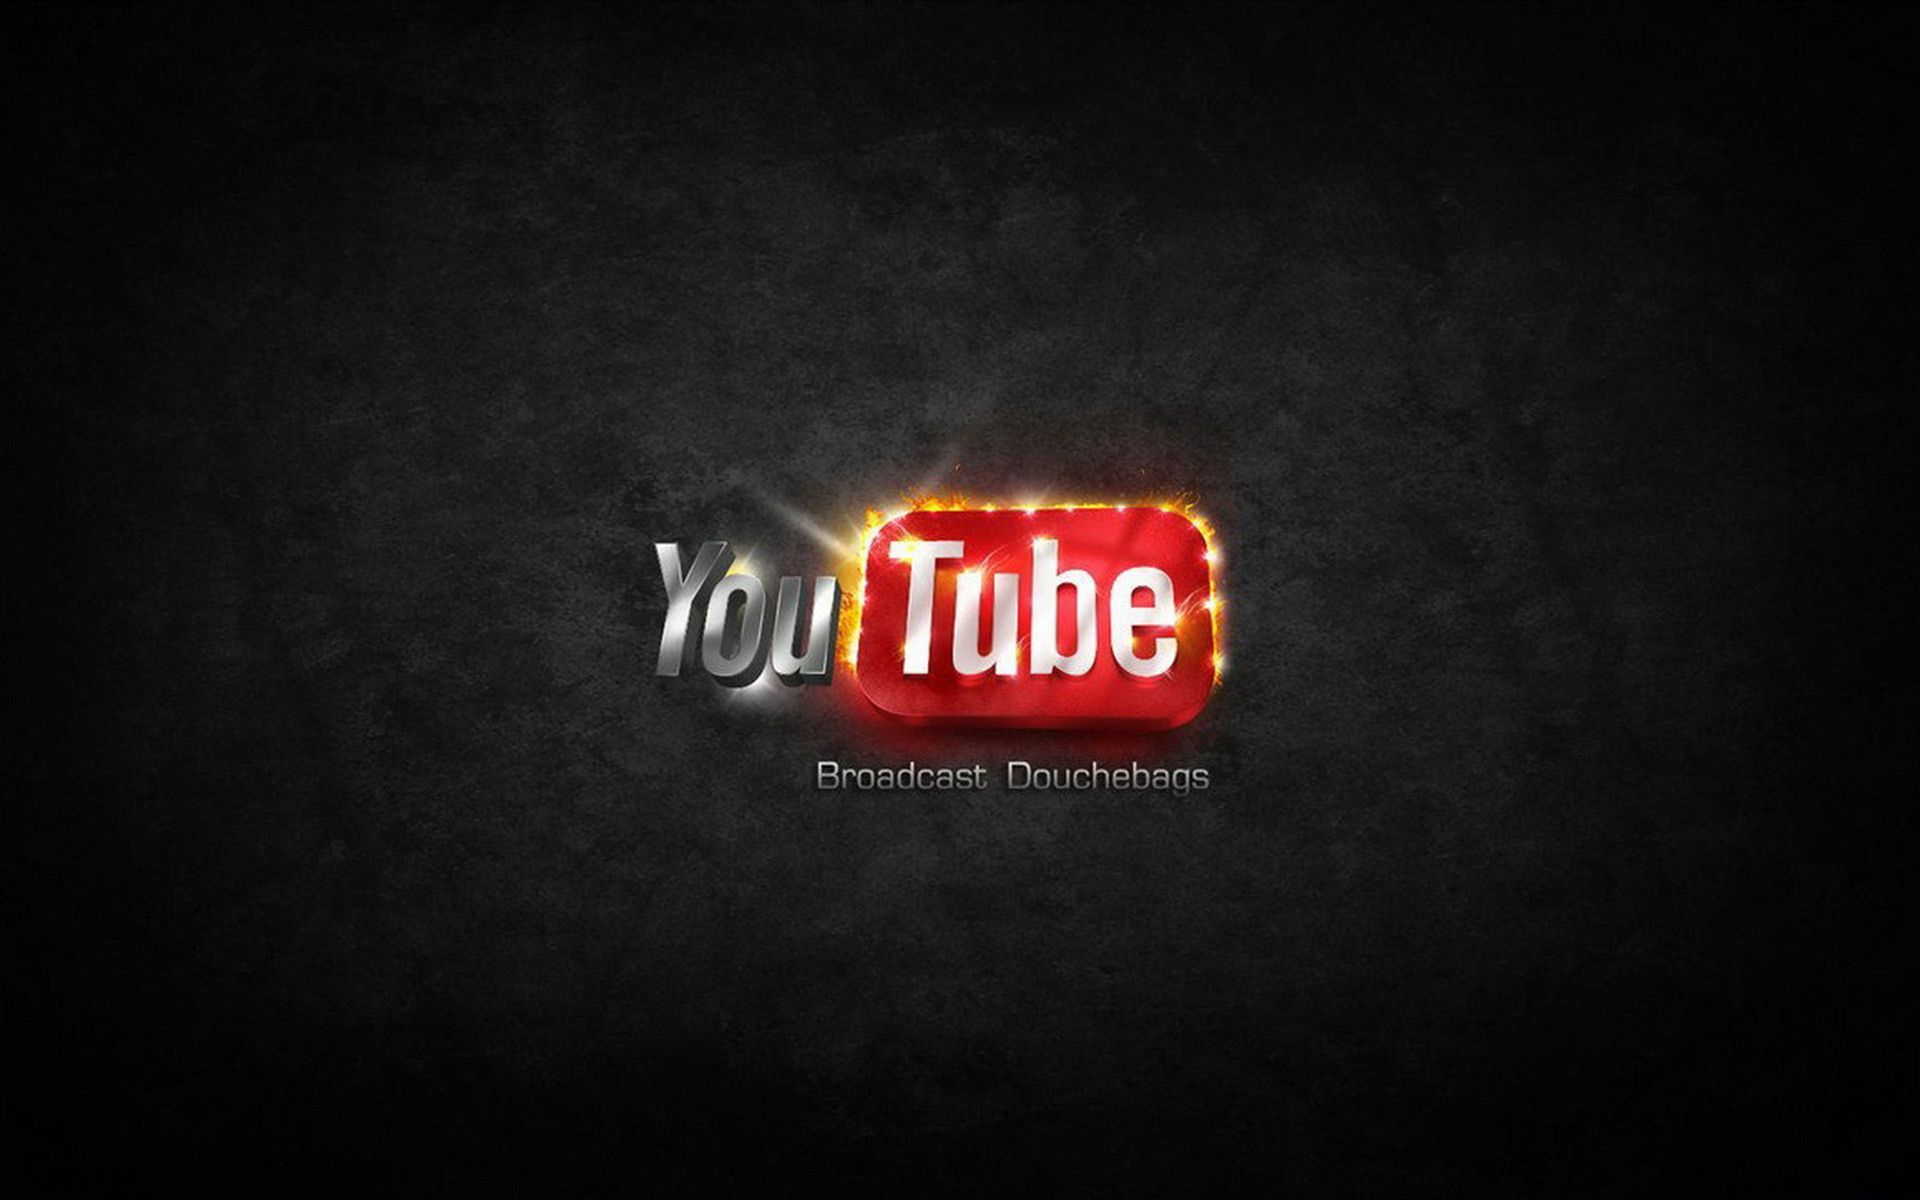 Cool YouTube Wallpaper